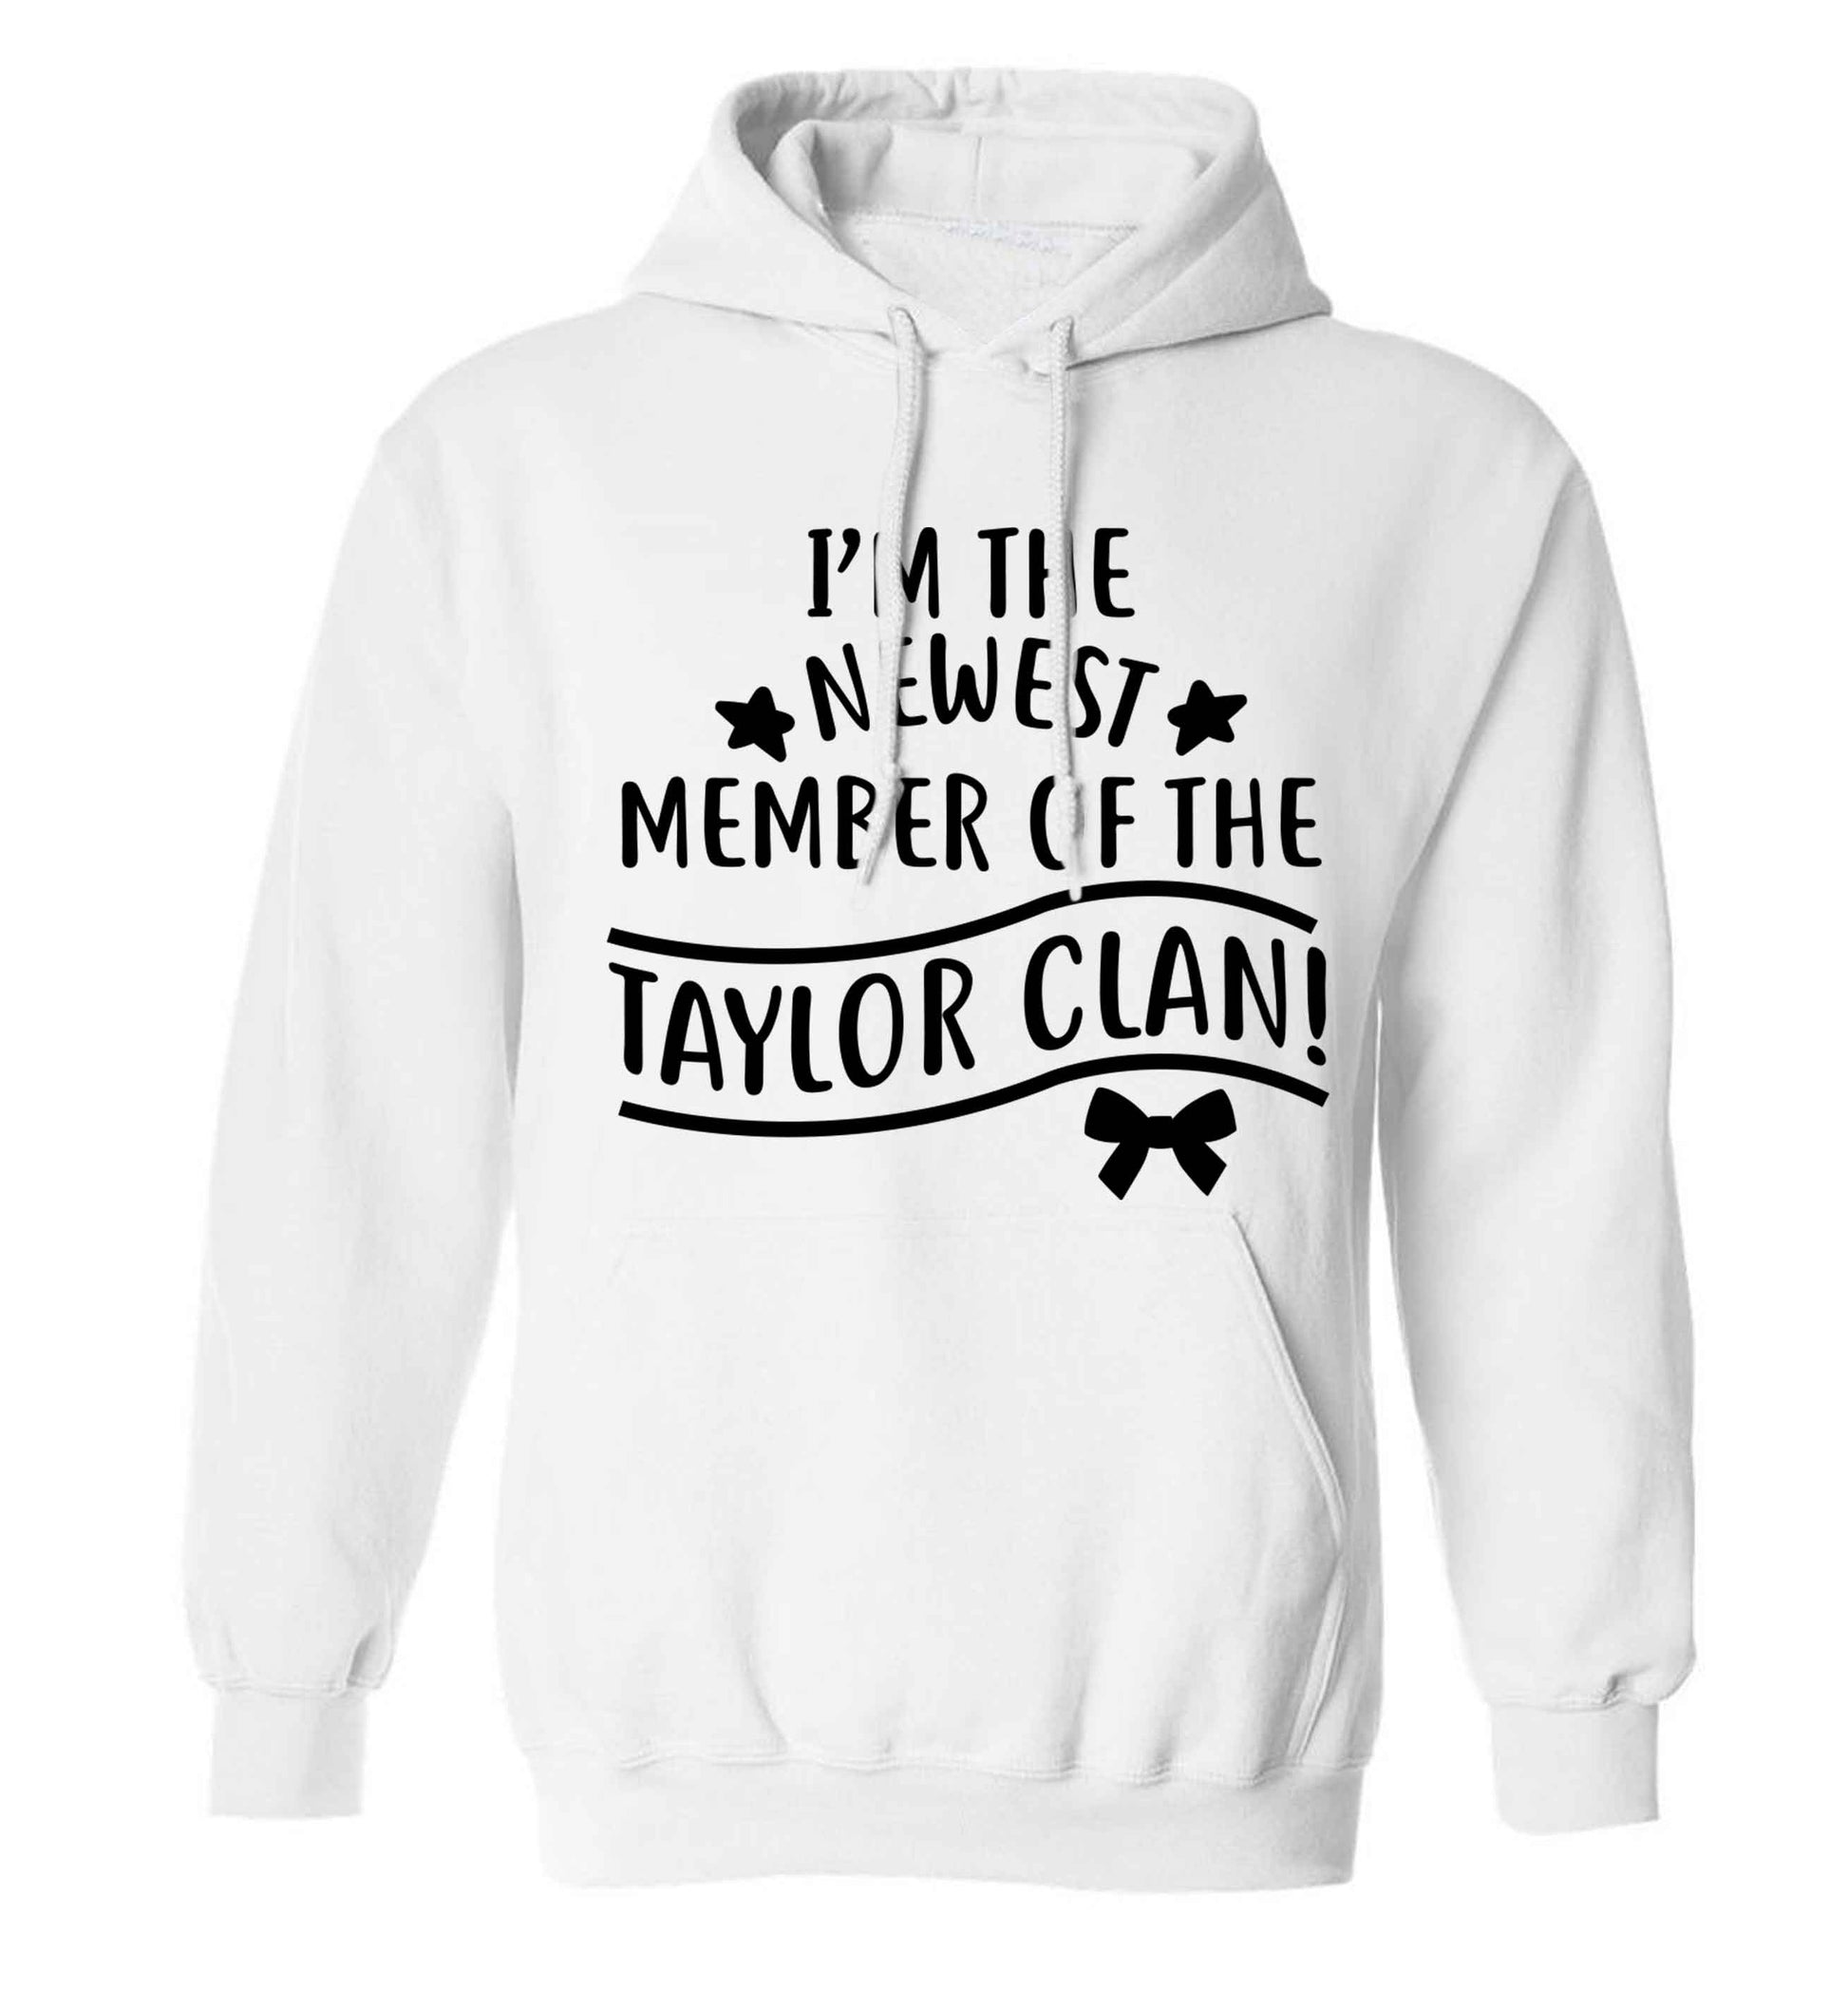 Personalised, newest member of the Taylor clan adults unisex white hoodie 2XL